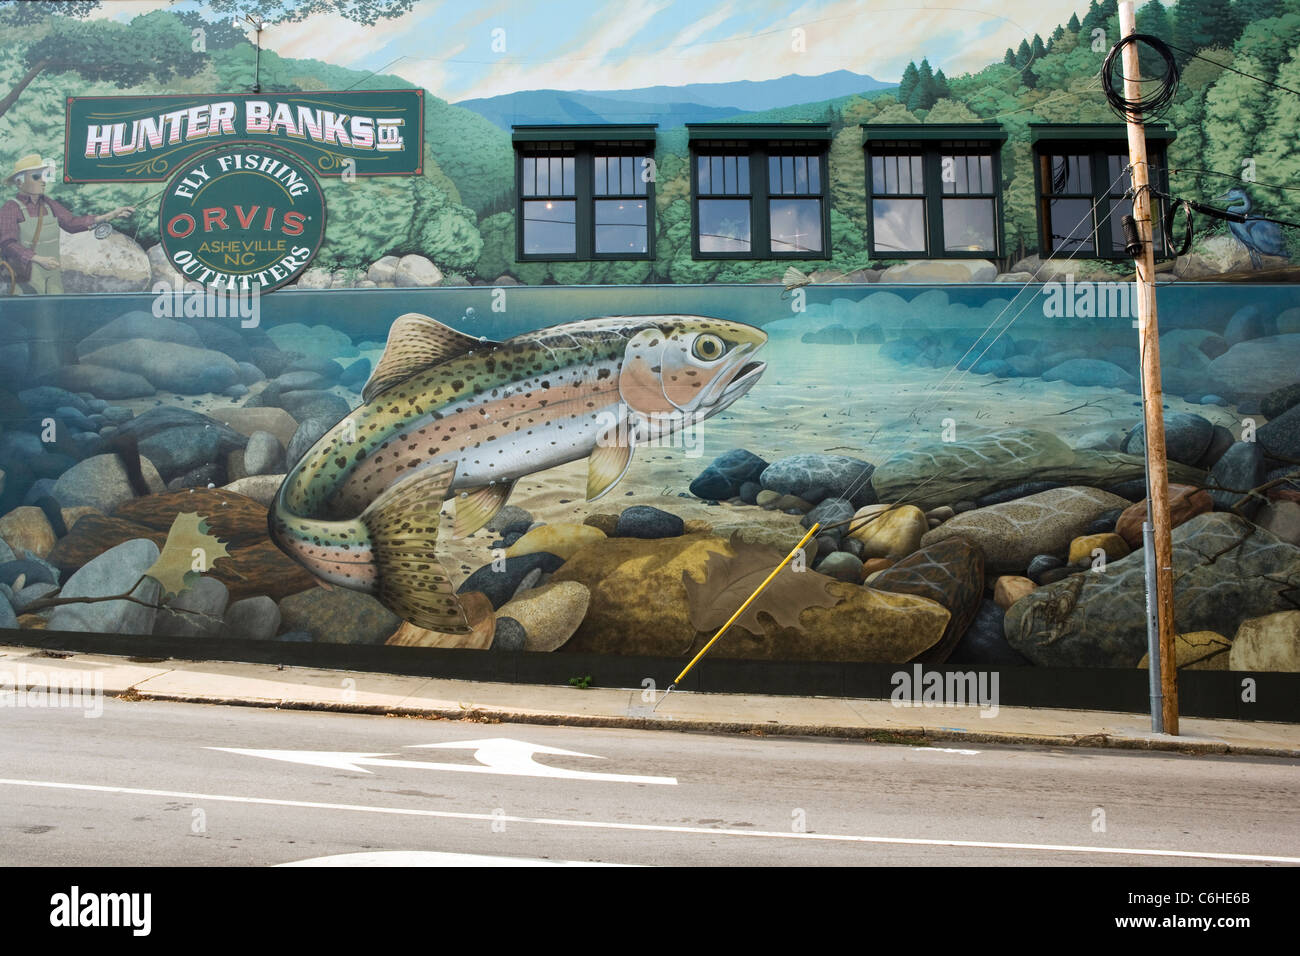 Mural on Hunter Banks Company building by Jeremy Russell and Scott Allred - Asheville, North Carolina USA Stock Photo